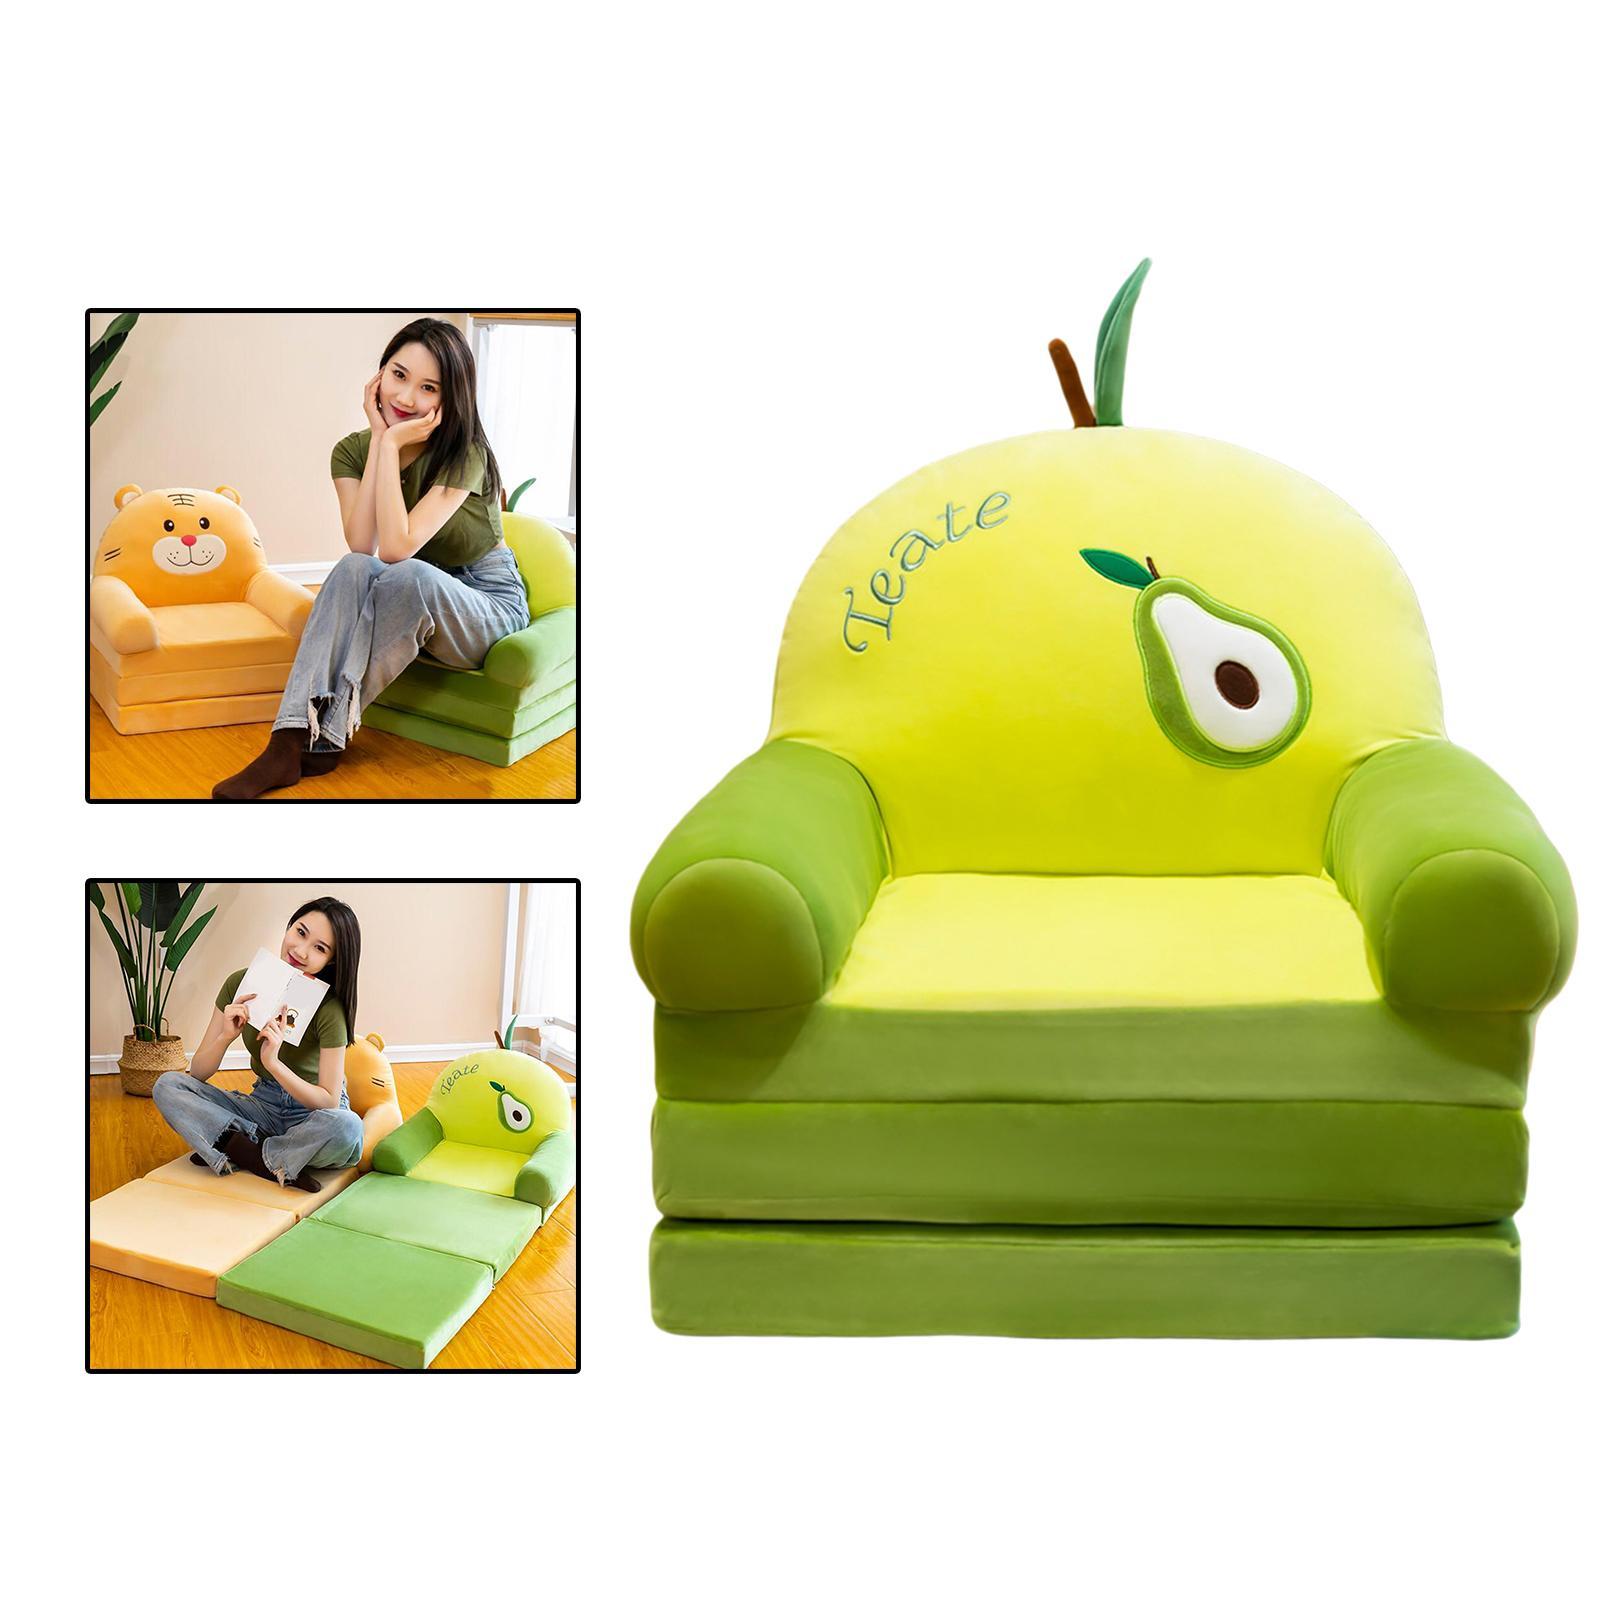 Boys Girls Cartoon Couch Chairs Cover Foldable Lovely Children Chair Seat Slipcover